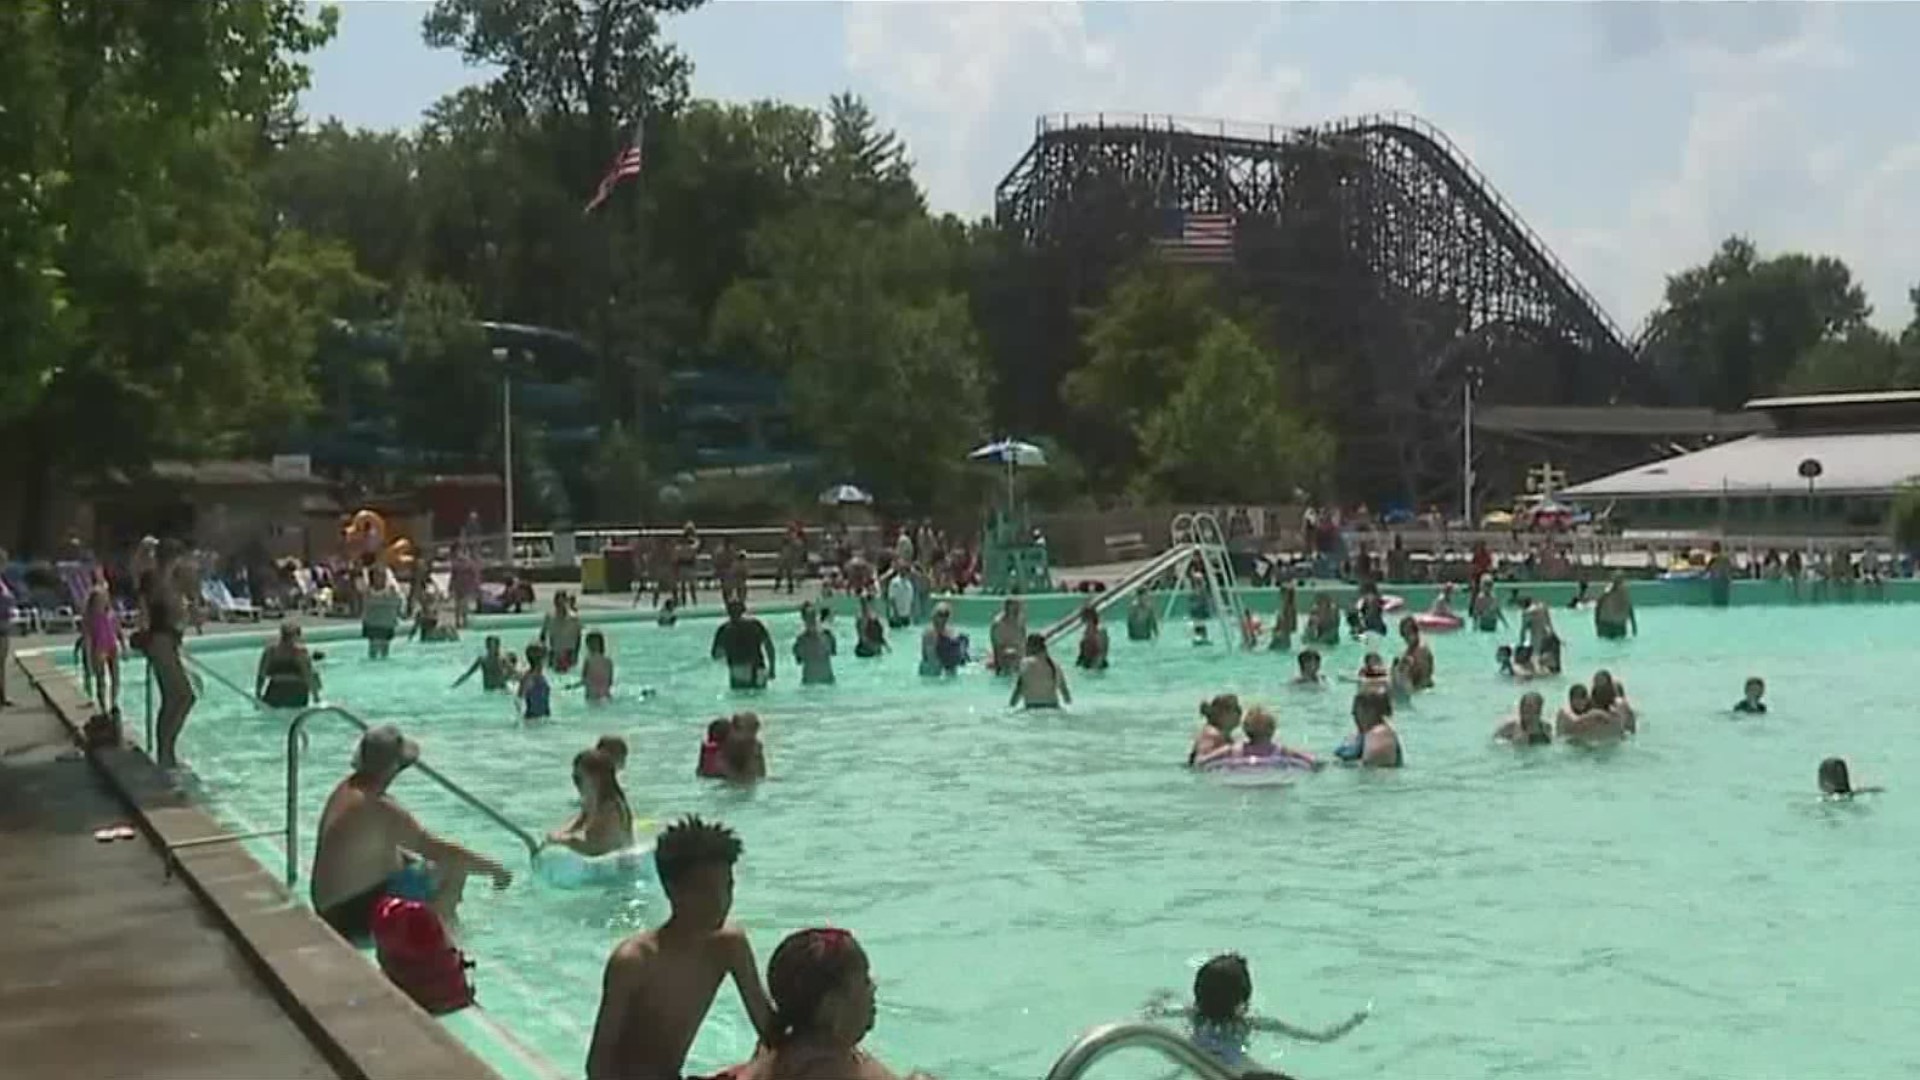 Planning a trip to Knoebels this weekend? Well, there's good news! You'll be able to enjoy all the rides and cool off at the pool.